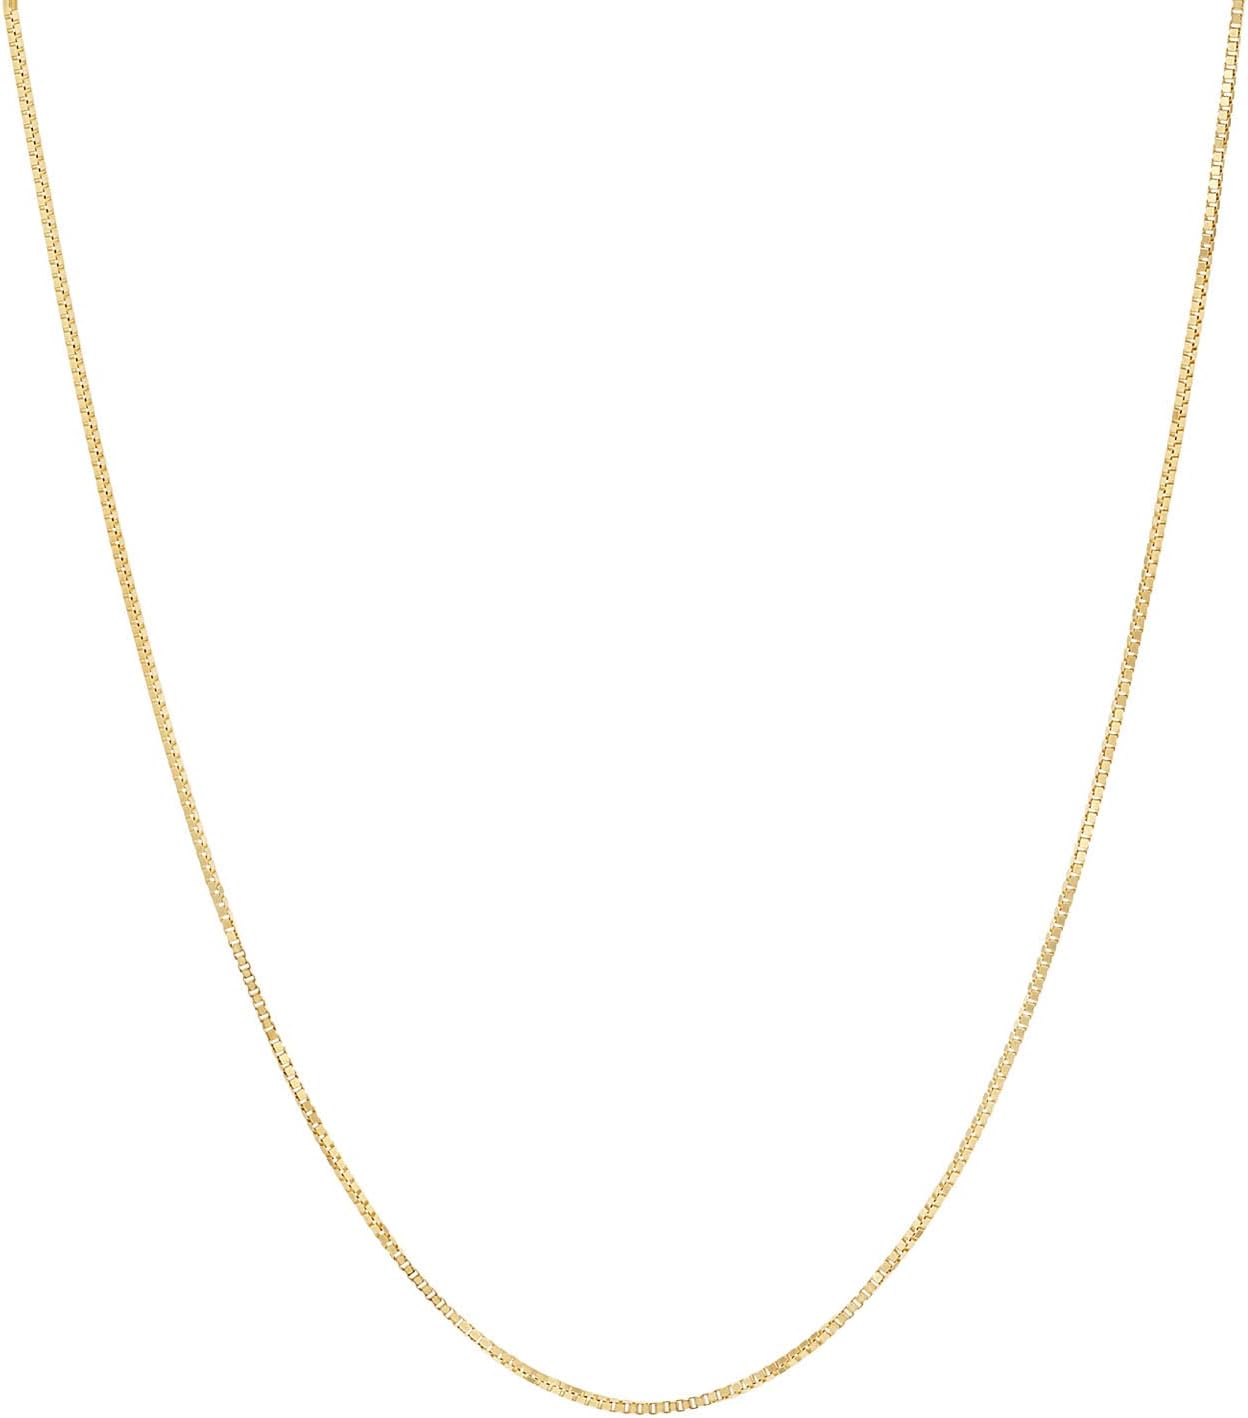 Vavily Minimalist Thin Gold Chain 18K Gold Thin Box Chain Necklace Short Small Gold Chain Choker Necklaces for Women